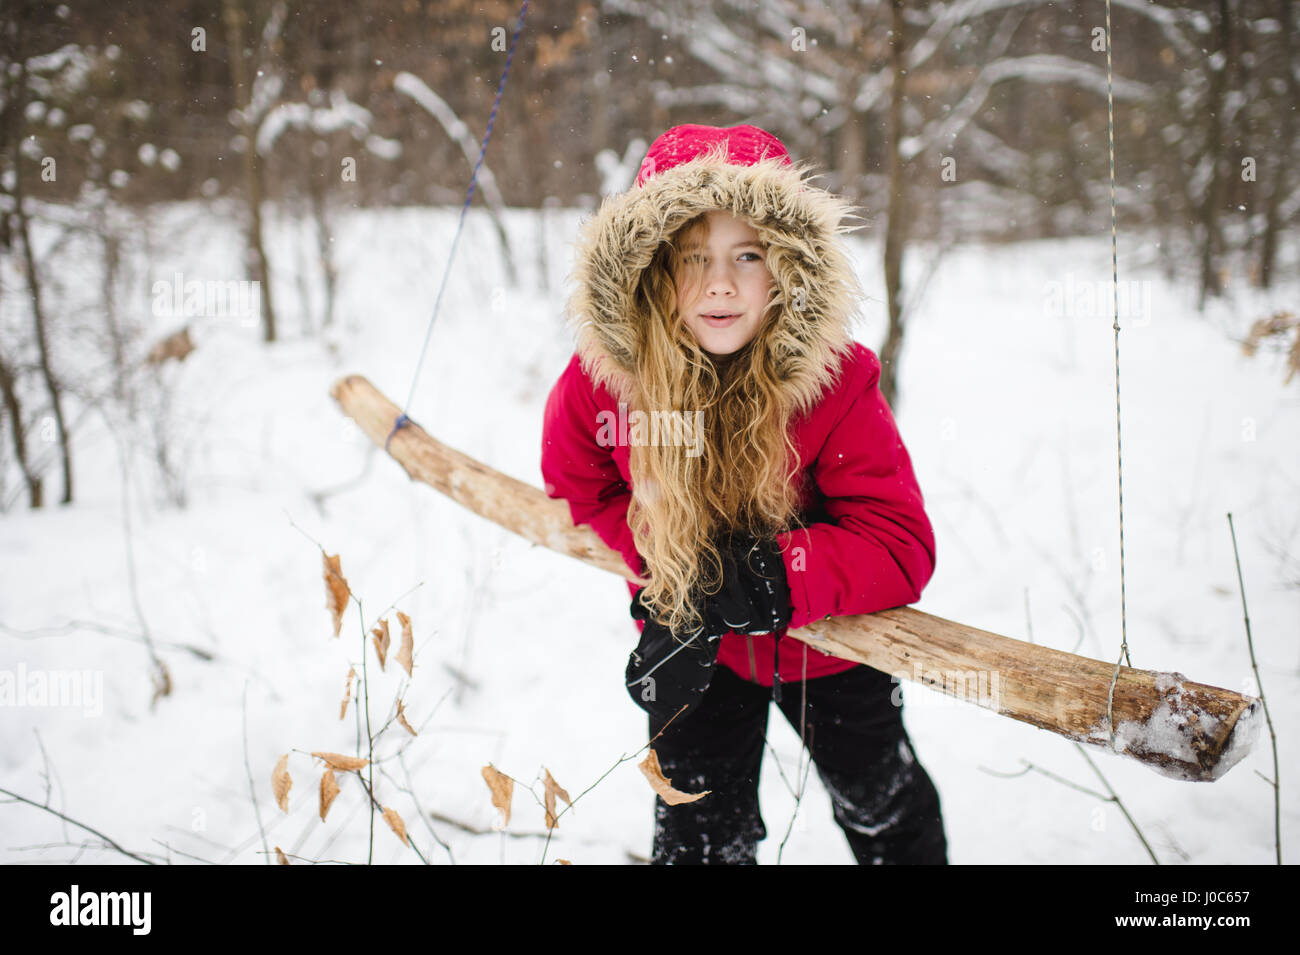 Girl leaning on wooden swing in woods Stock Photo